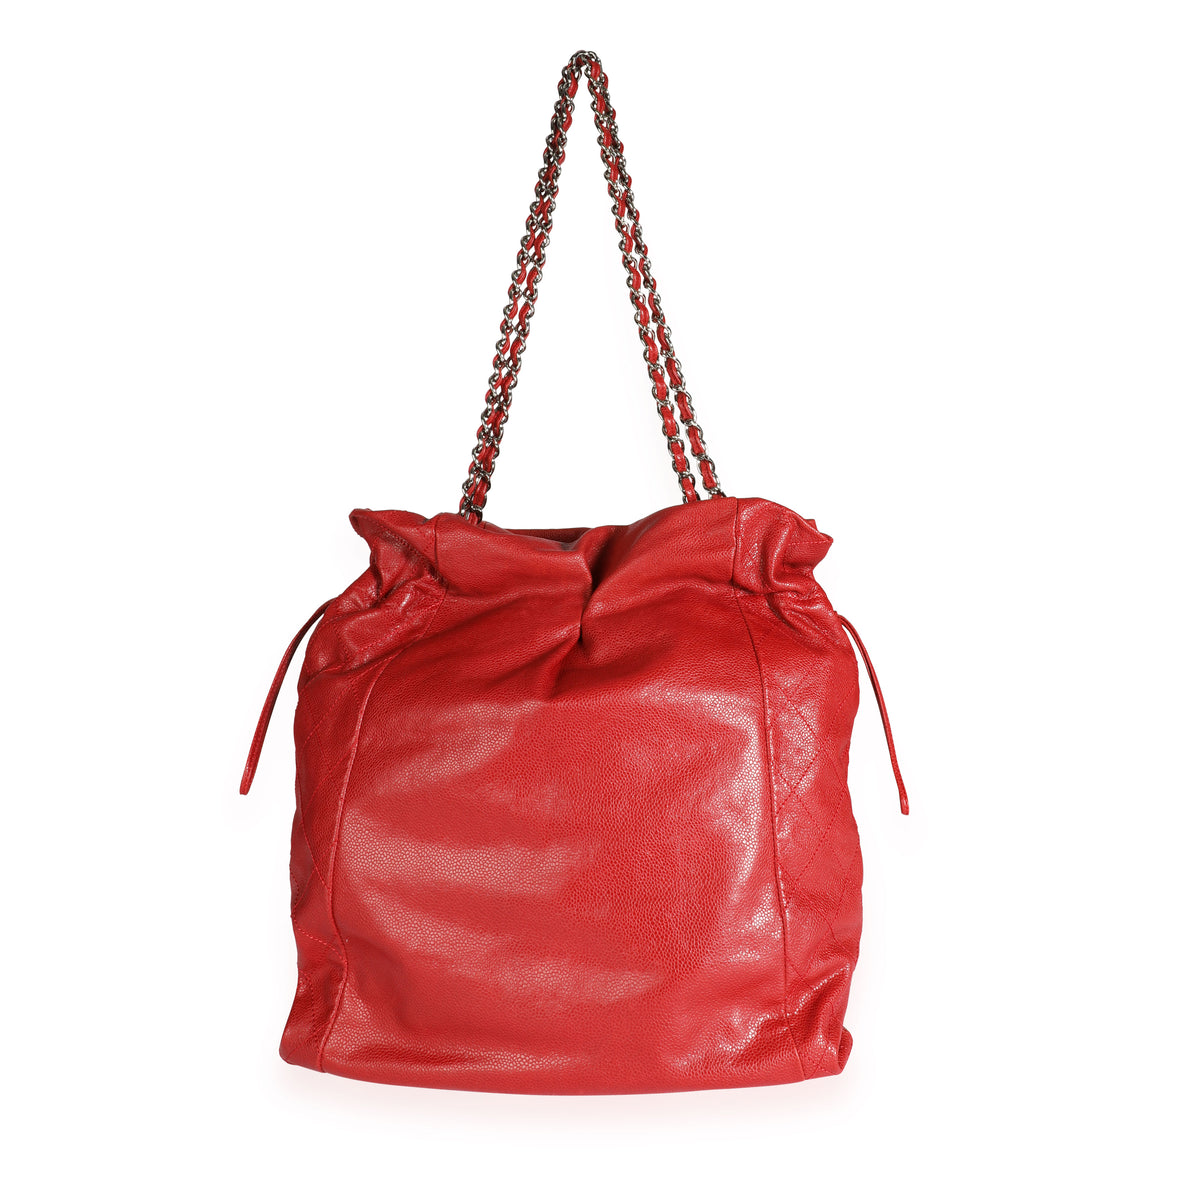 Chanel Red Caviar Leather Timeless Drawstring Tote